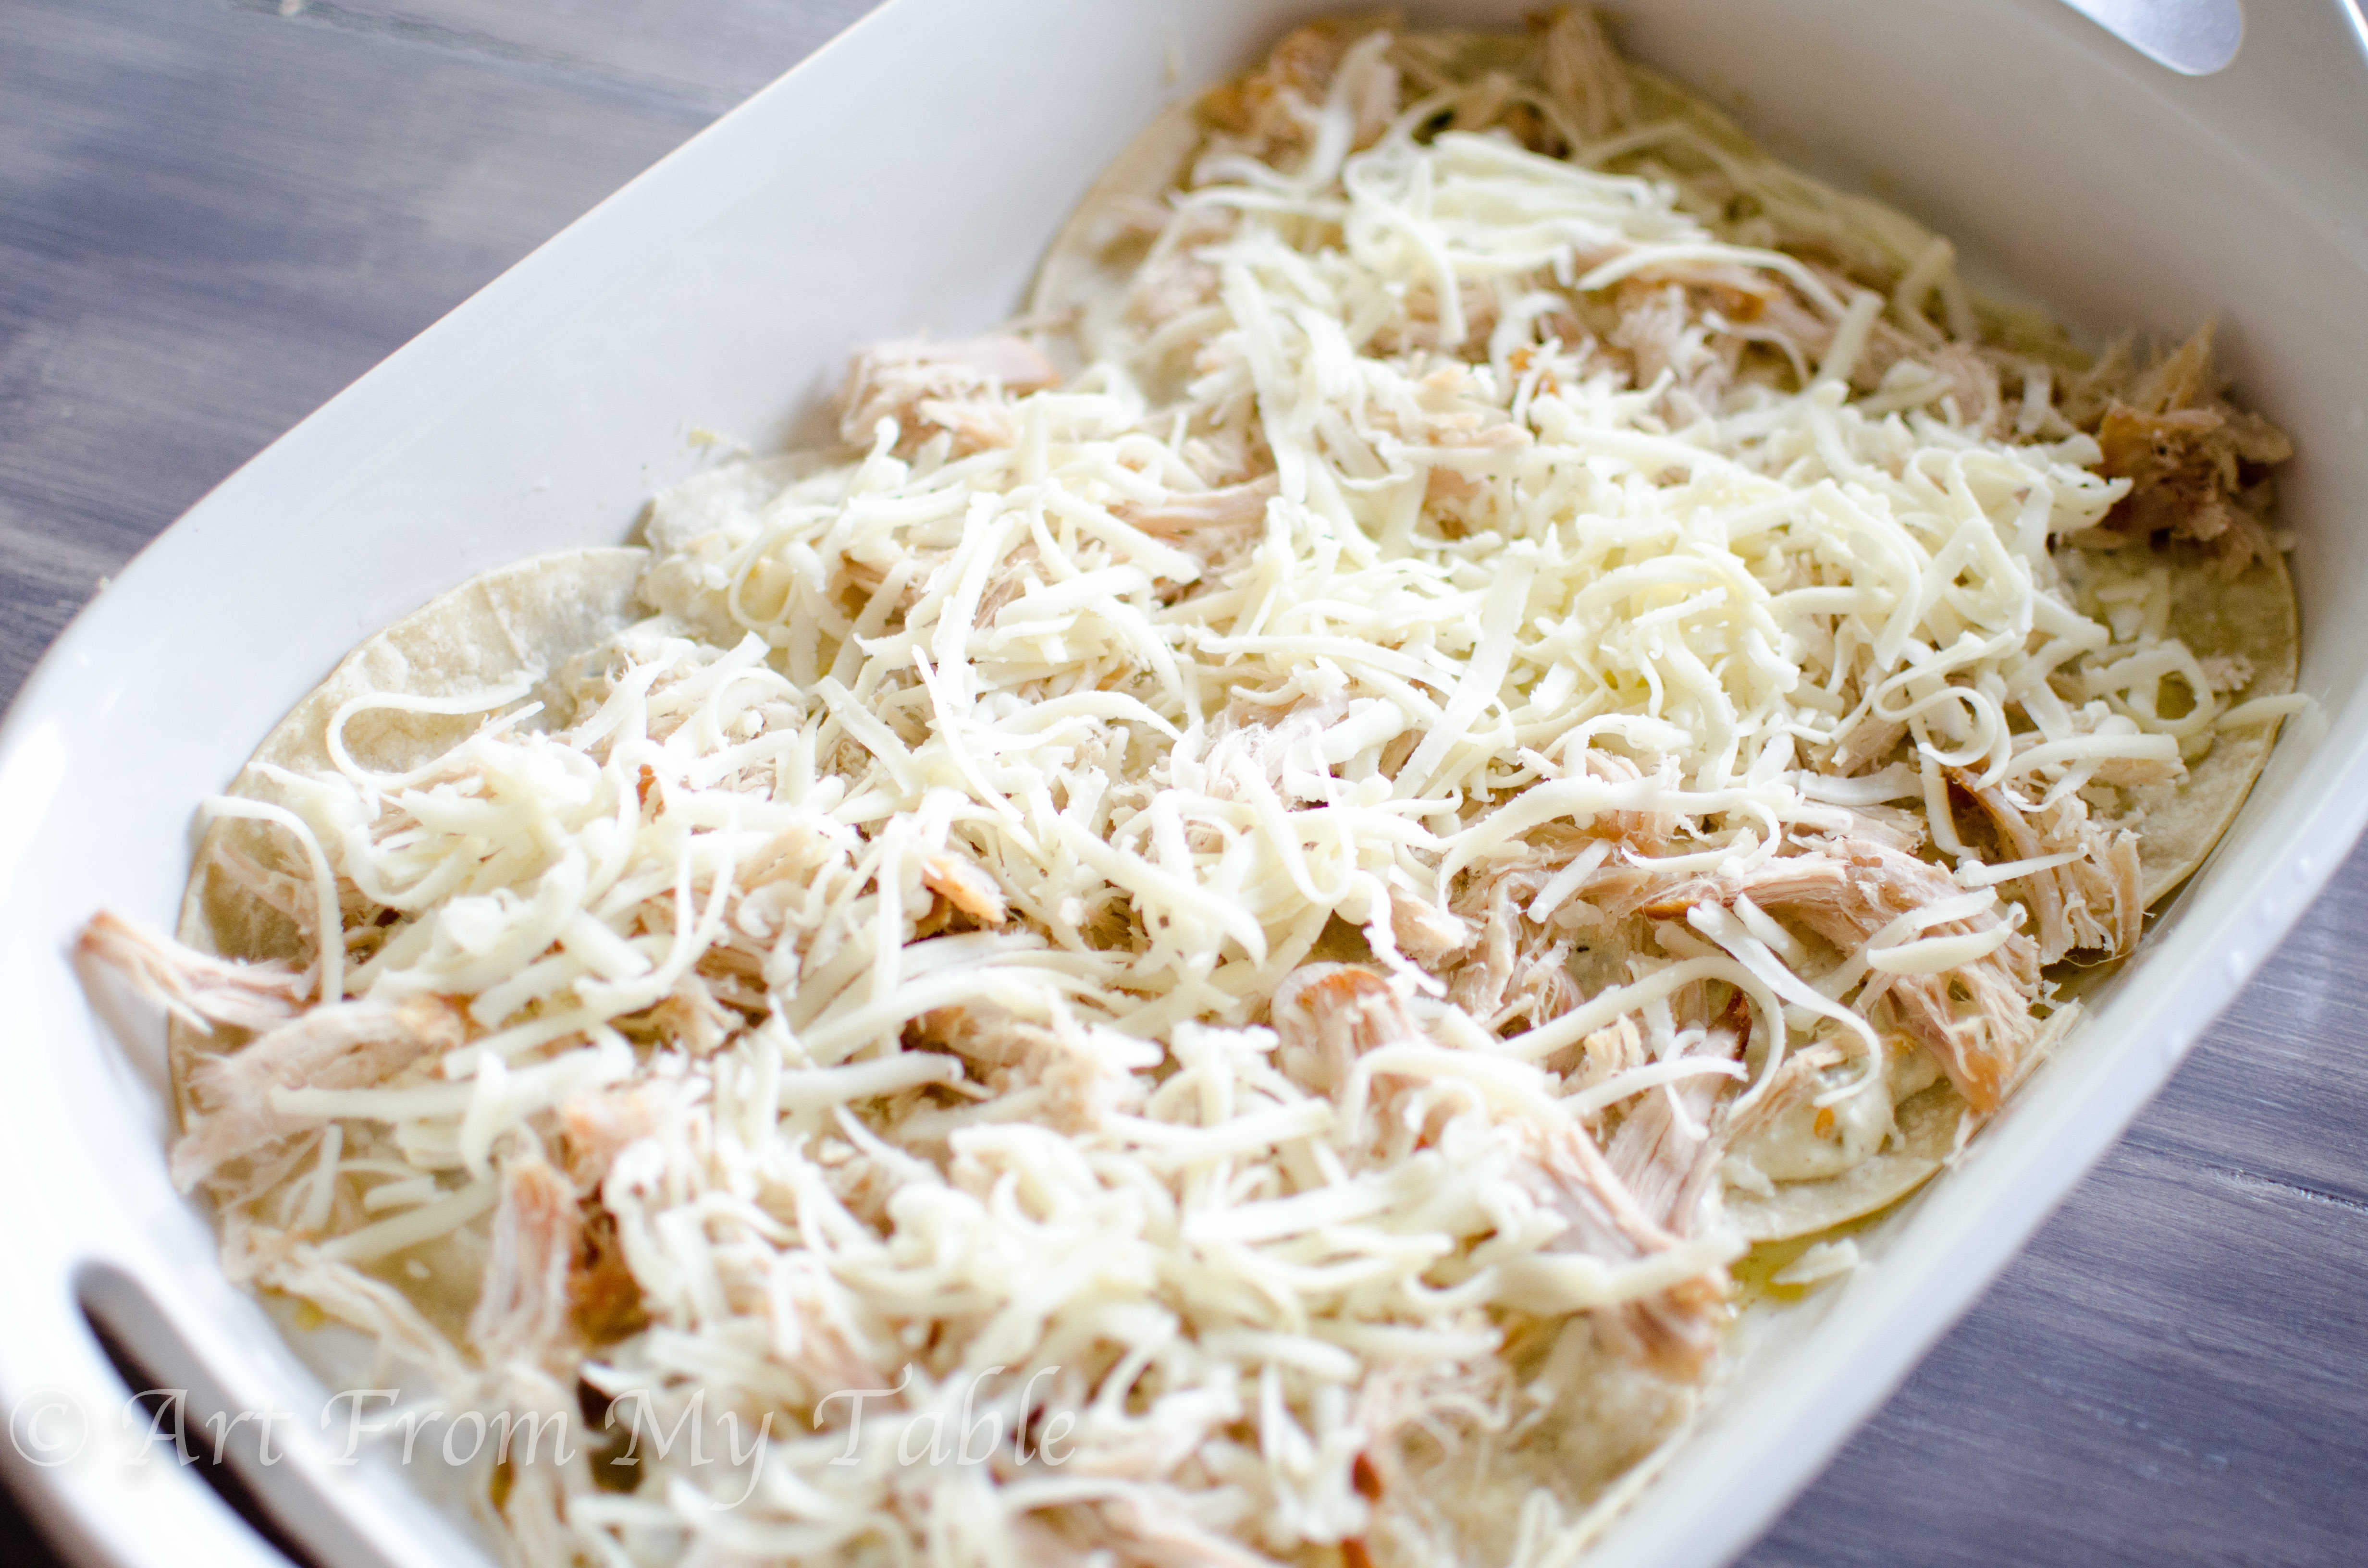 Layer of cheese added to the carnitas casserole verde.